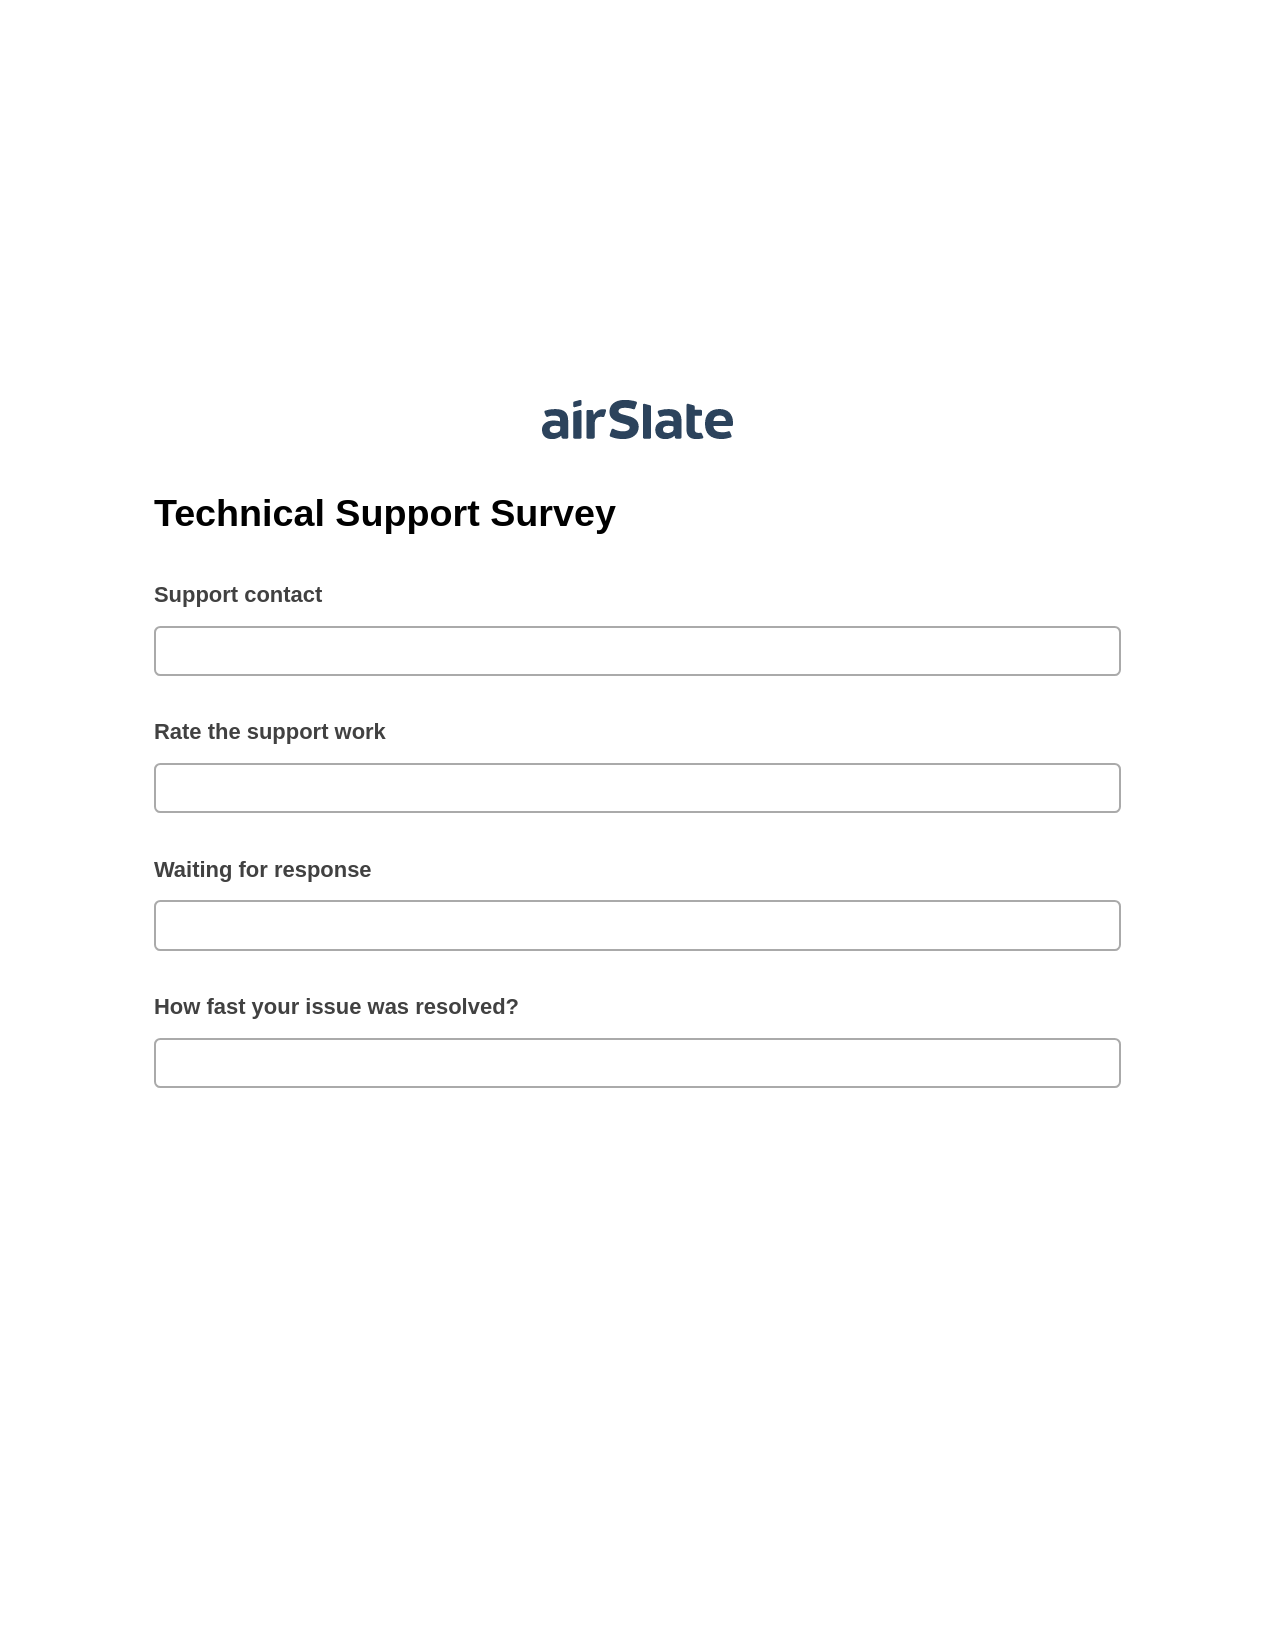 Technical Support Survey Pre-fill from Salesforce Records with SOQL Bot, Revoke Access Bot, Export to Google Sheet Bot